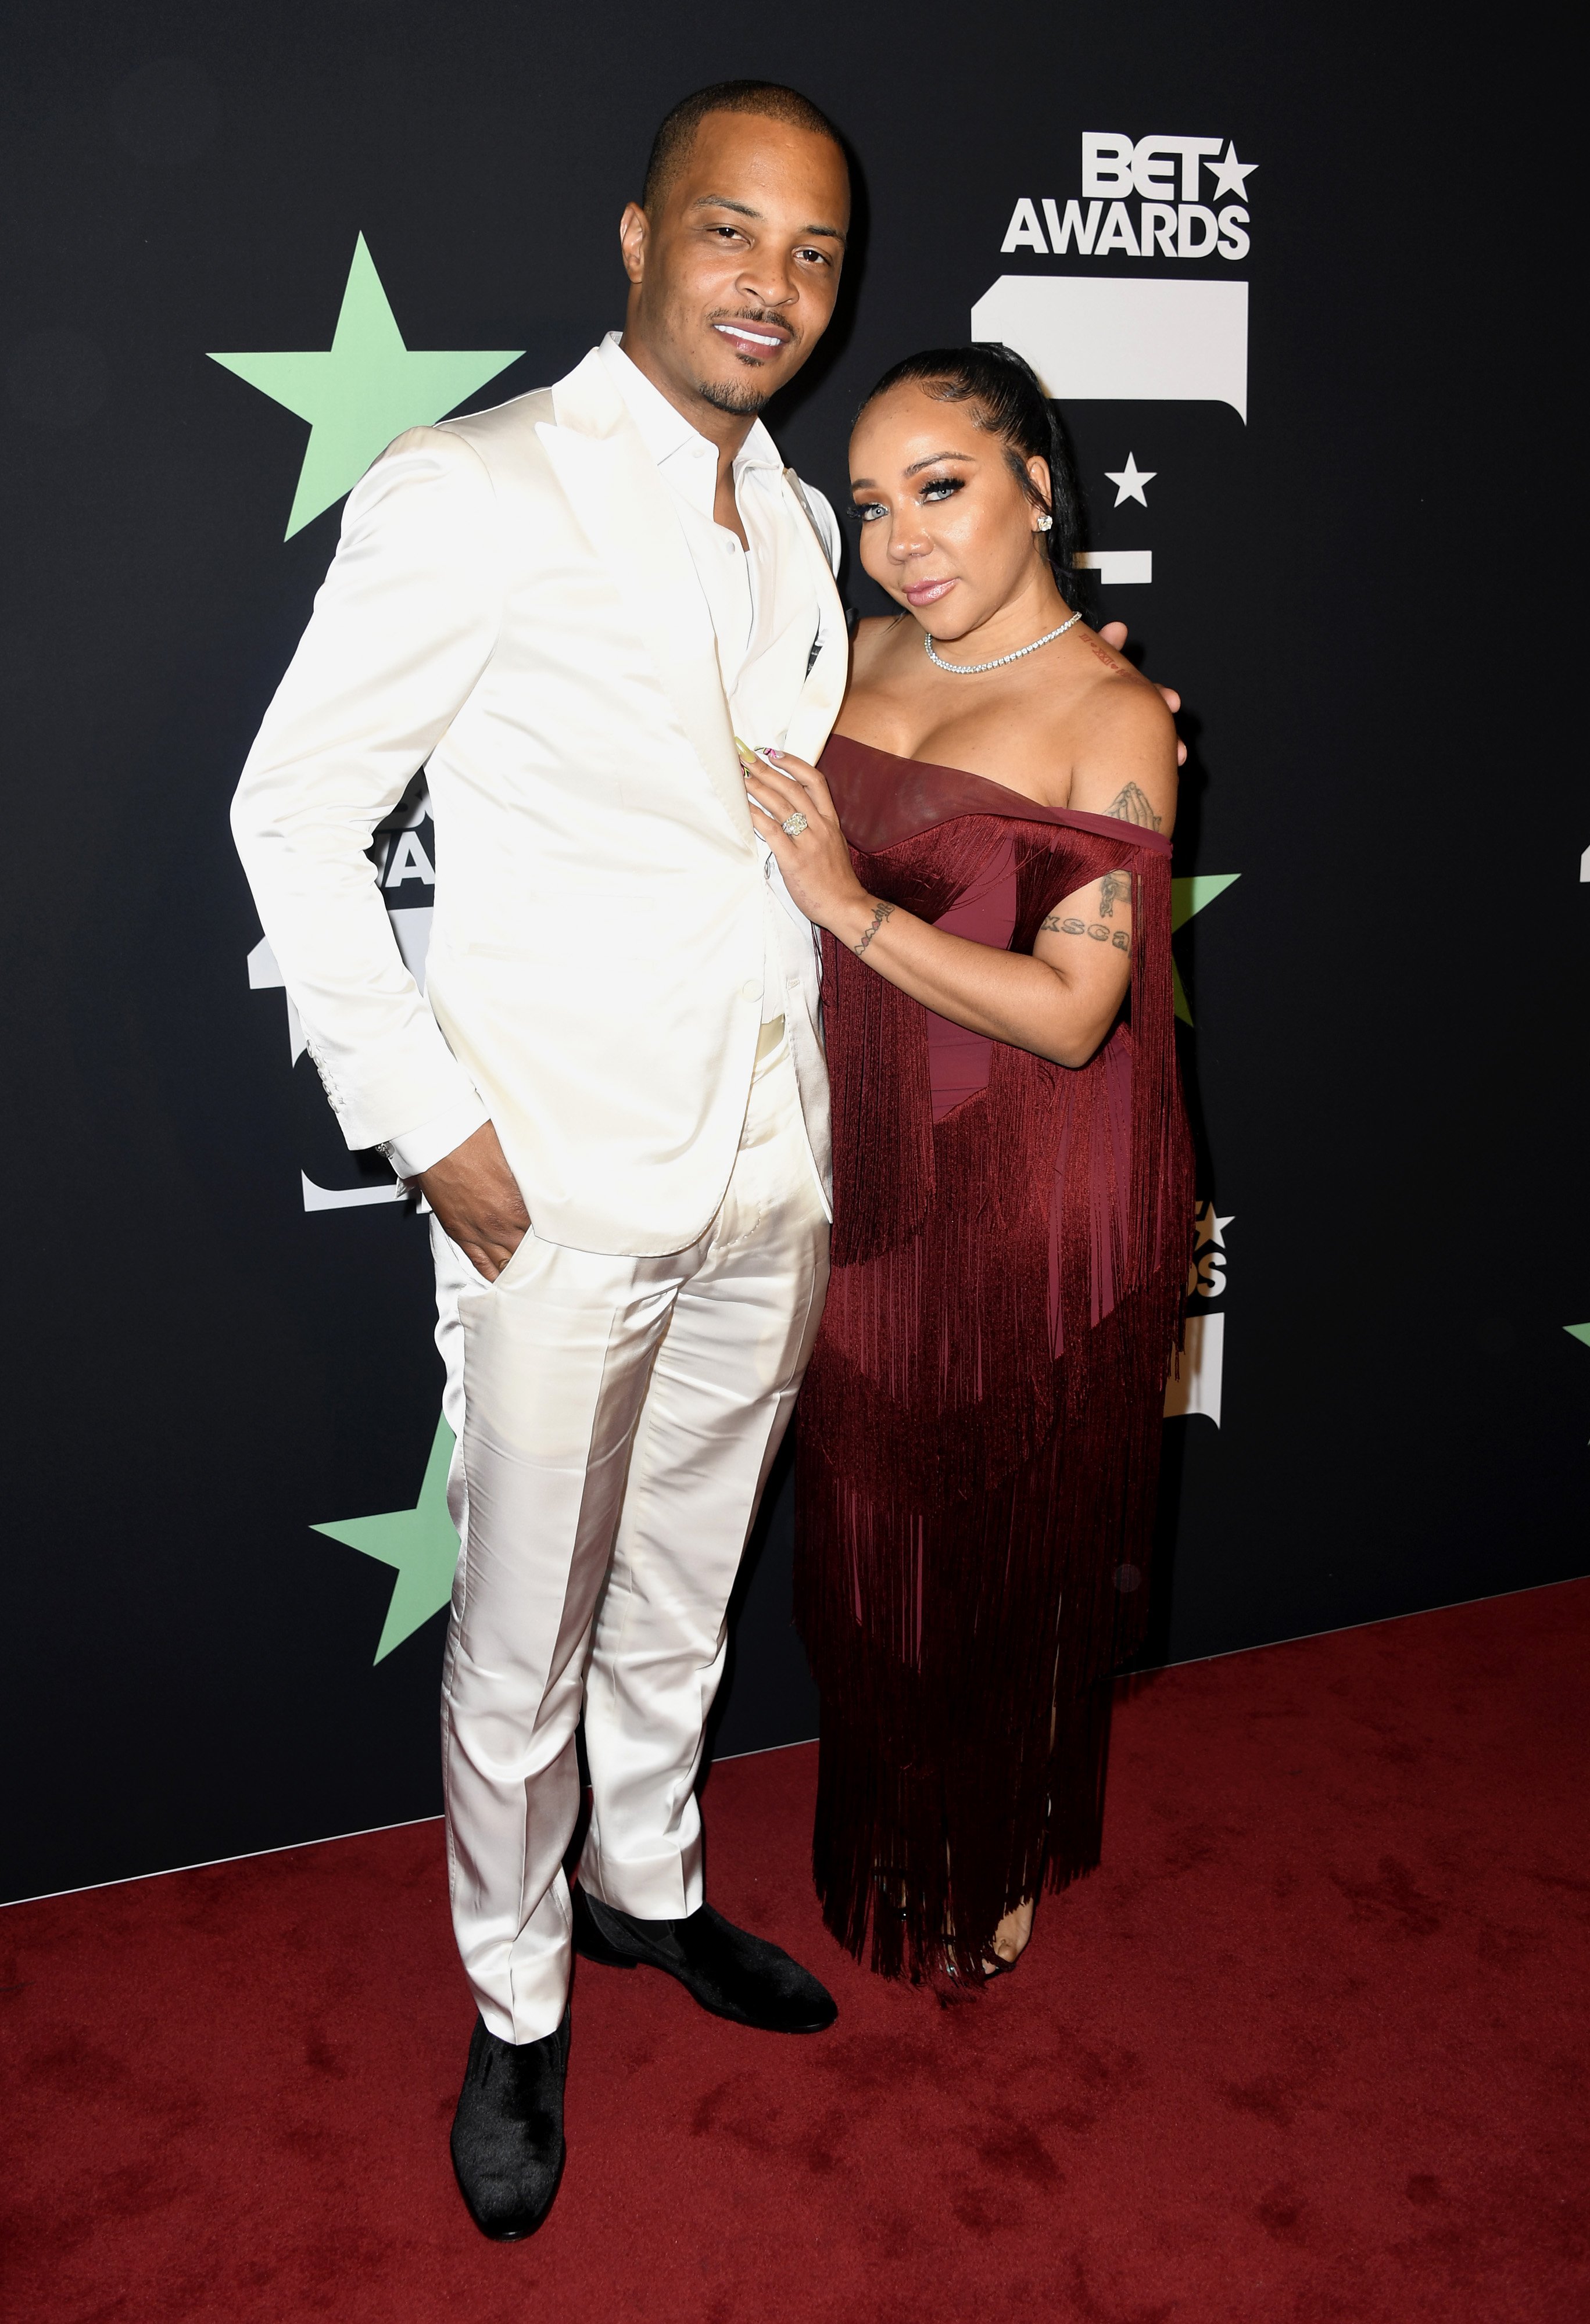 Tiny & T.I. at the 2019 BET Awards on June 23, 2019 in Los Angeles, California. | Photo: Getty Images